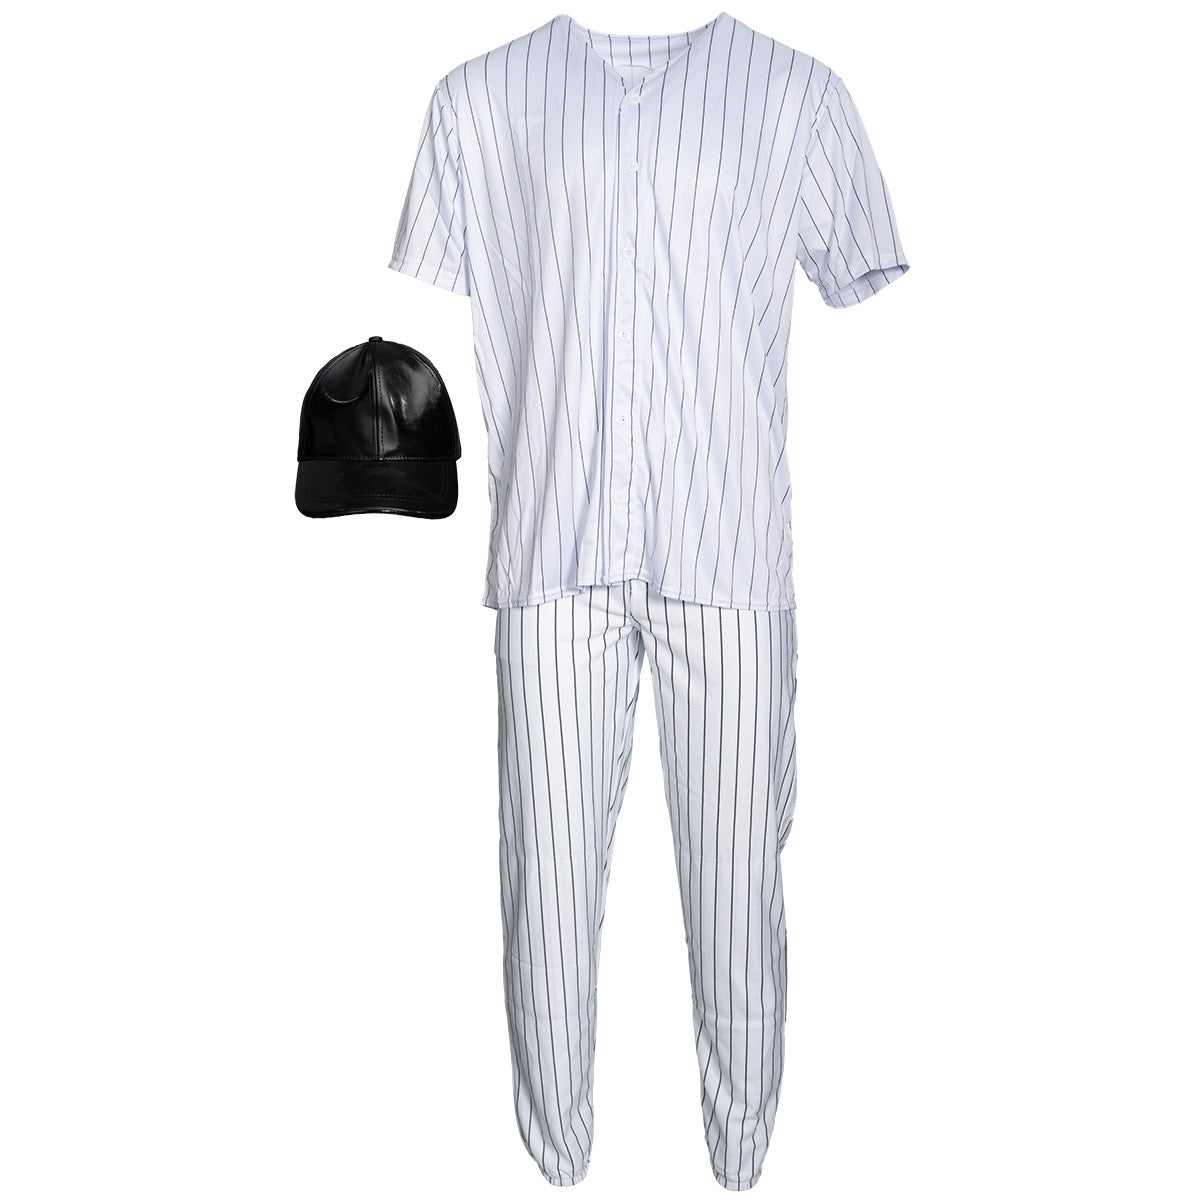 The Warriors Complete Adult Costume Set Pants Shirt and Hat for Halloween Costume Cosplay Front View